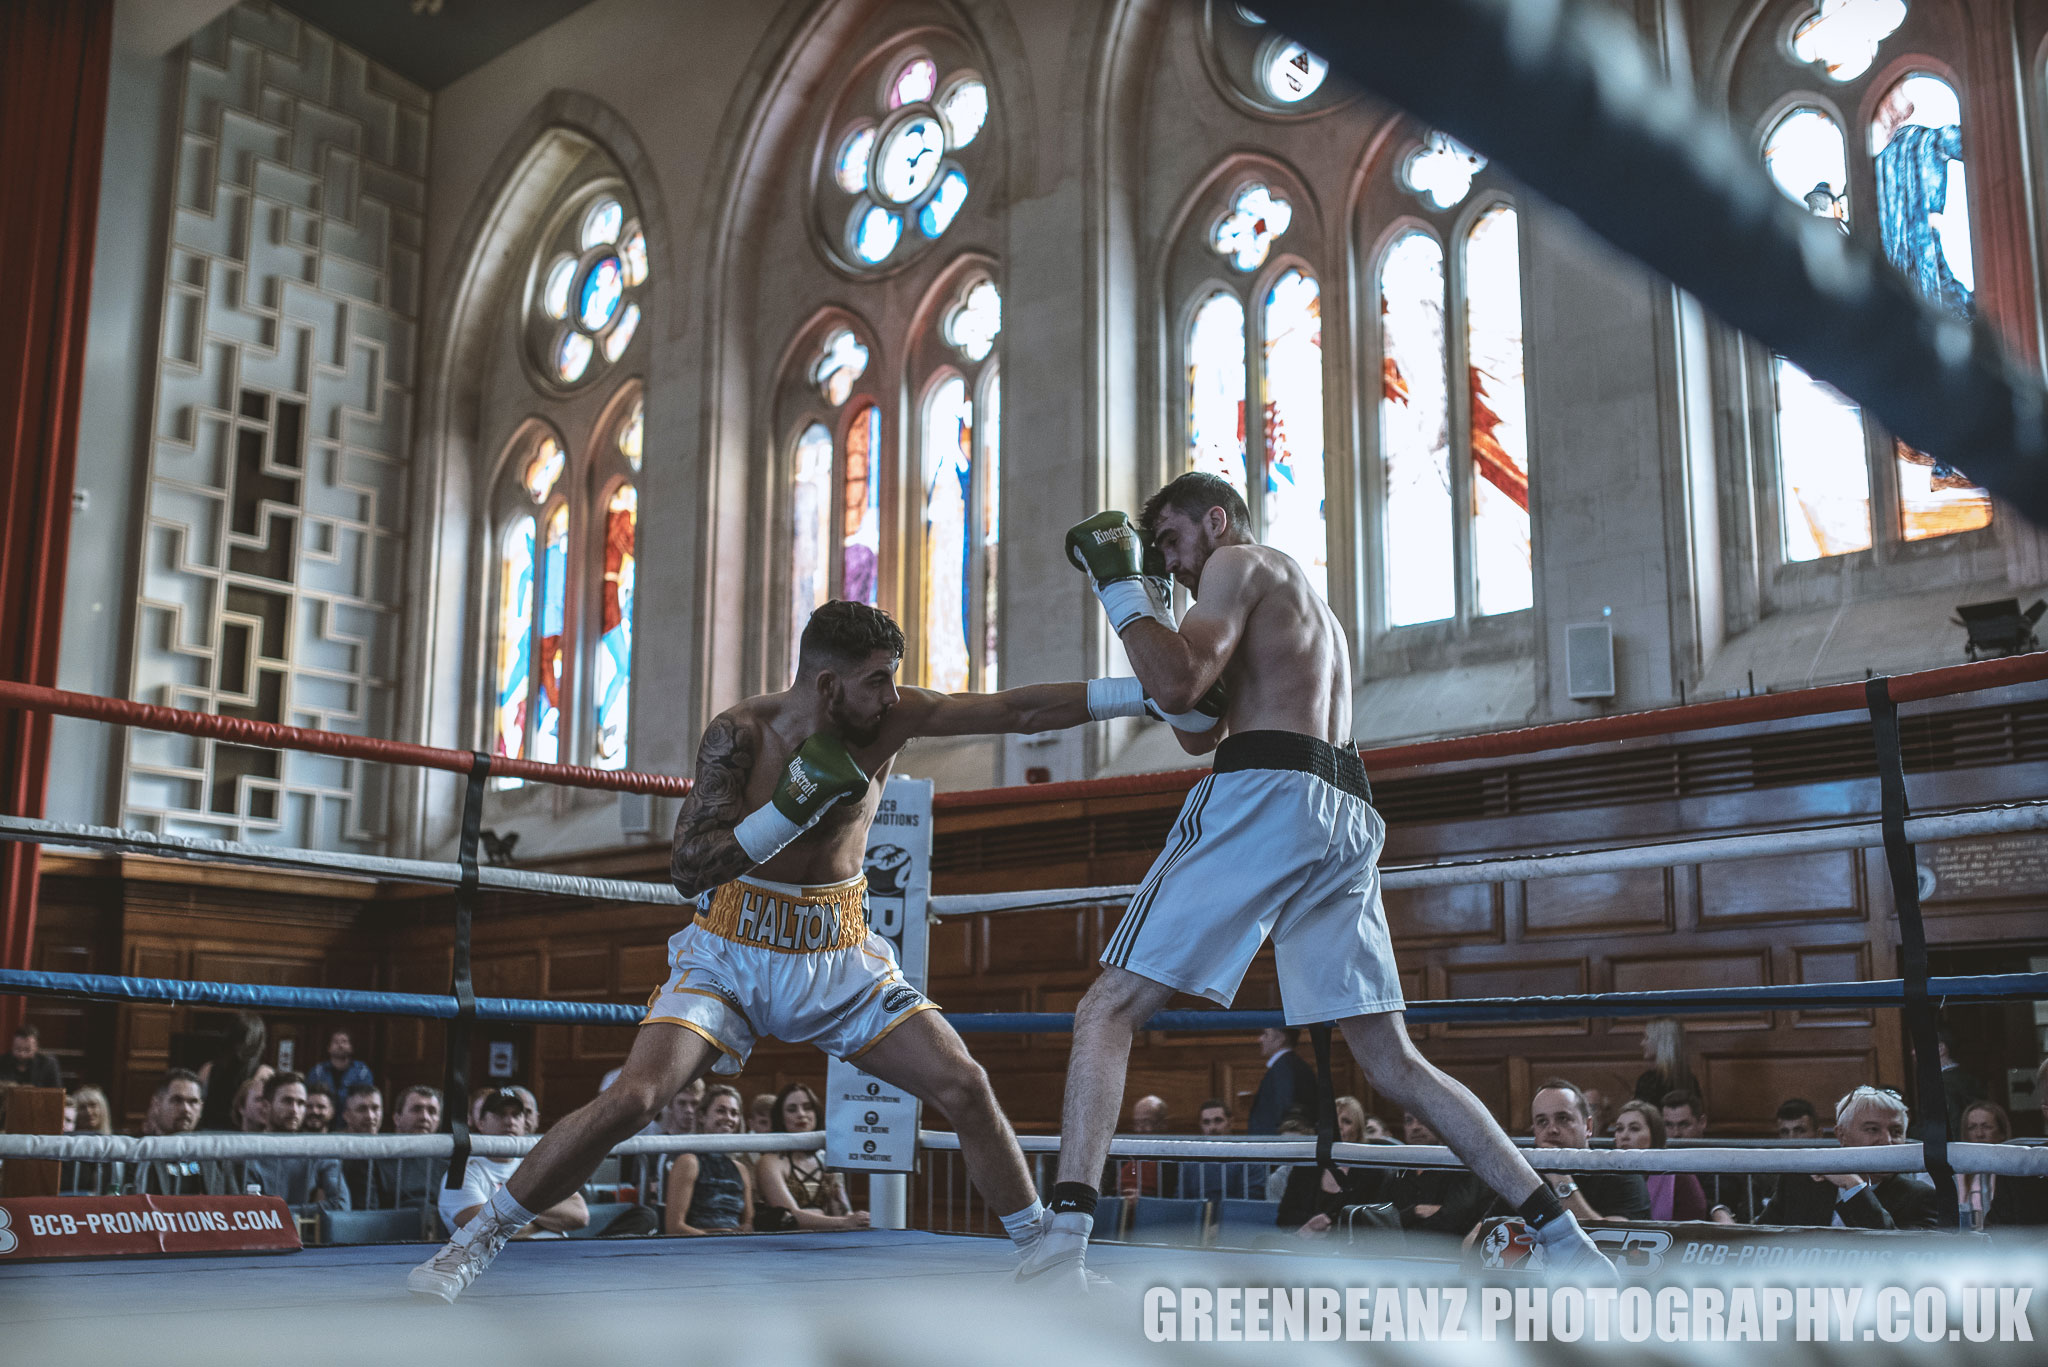 Nathan Halton versus Callum Ide 'Fireworks at the hall' in Plymouth's Guildhall